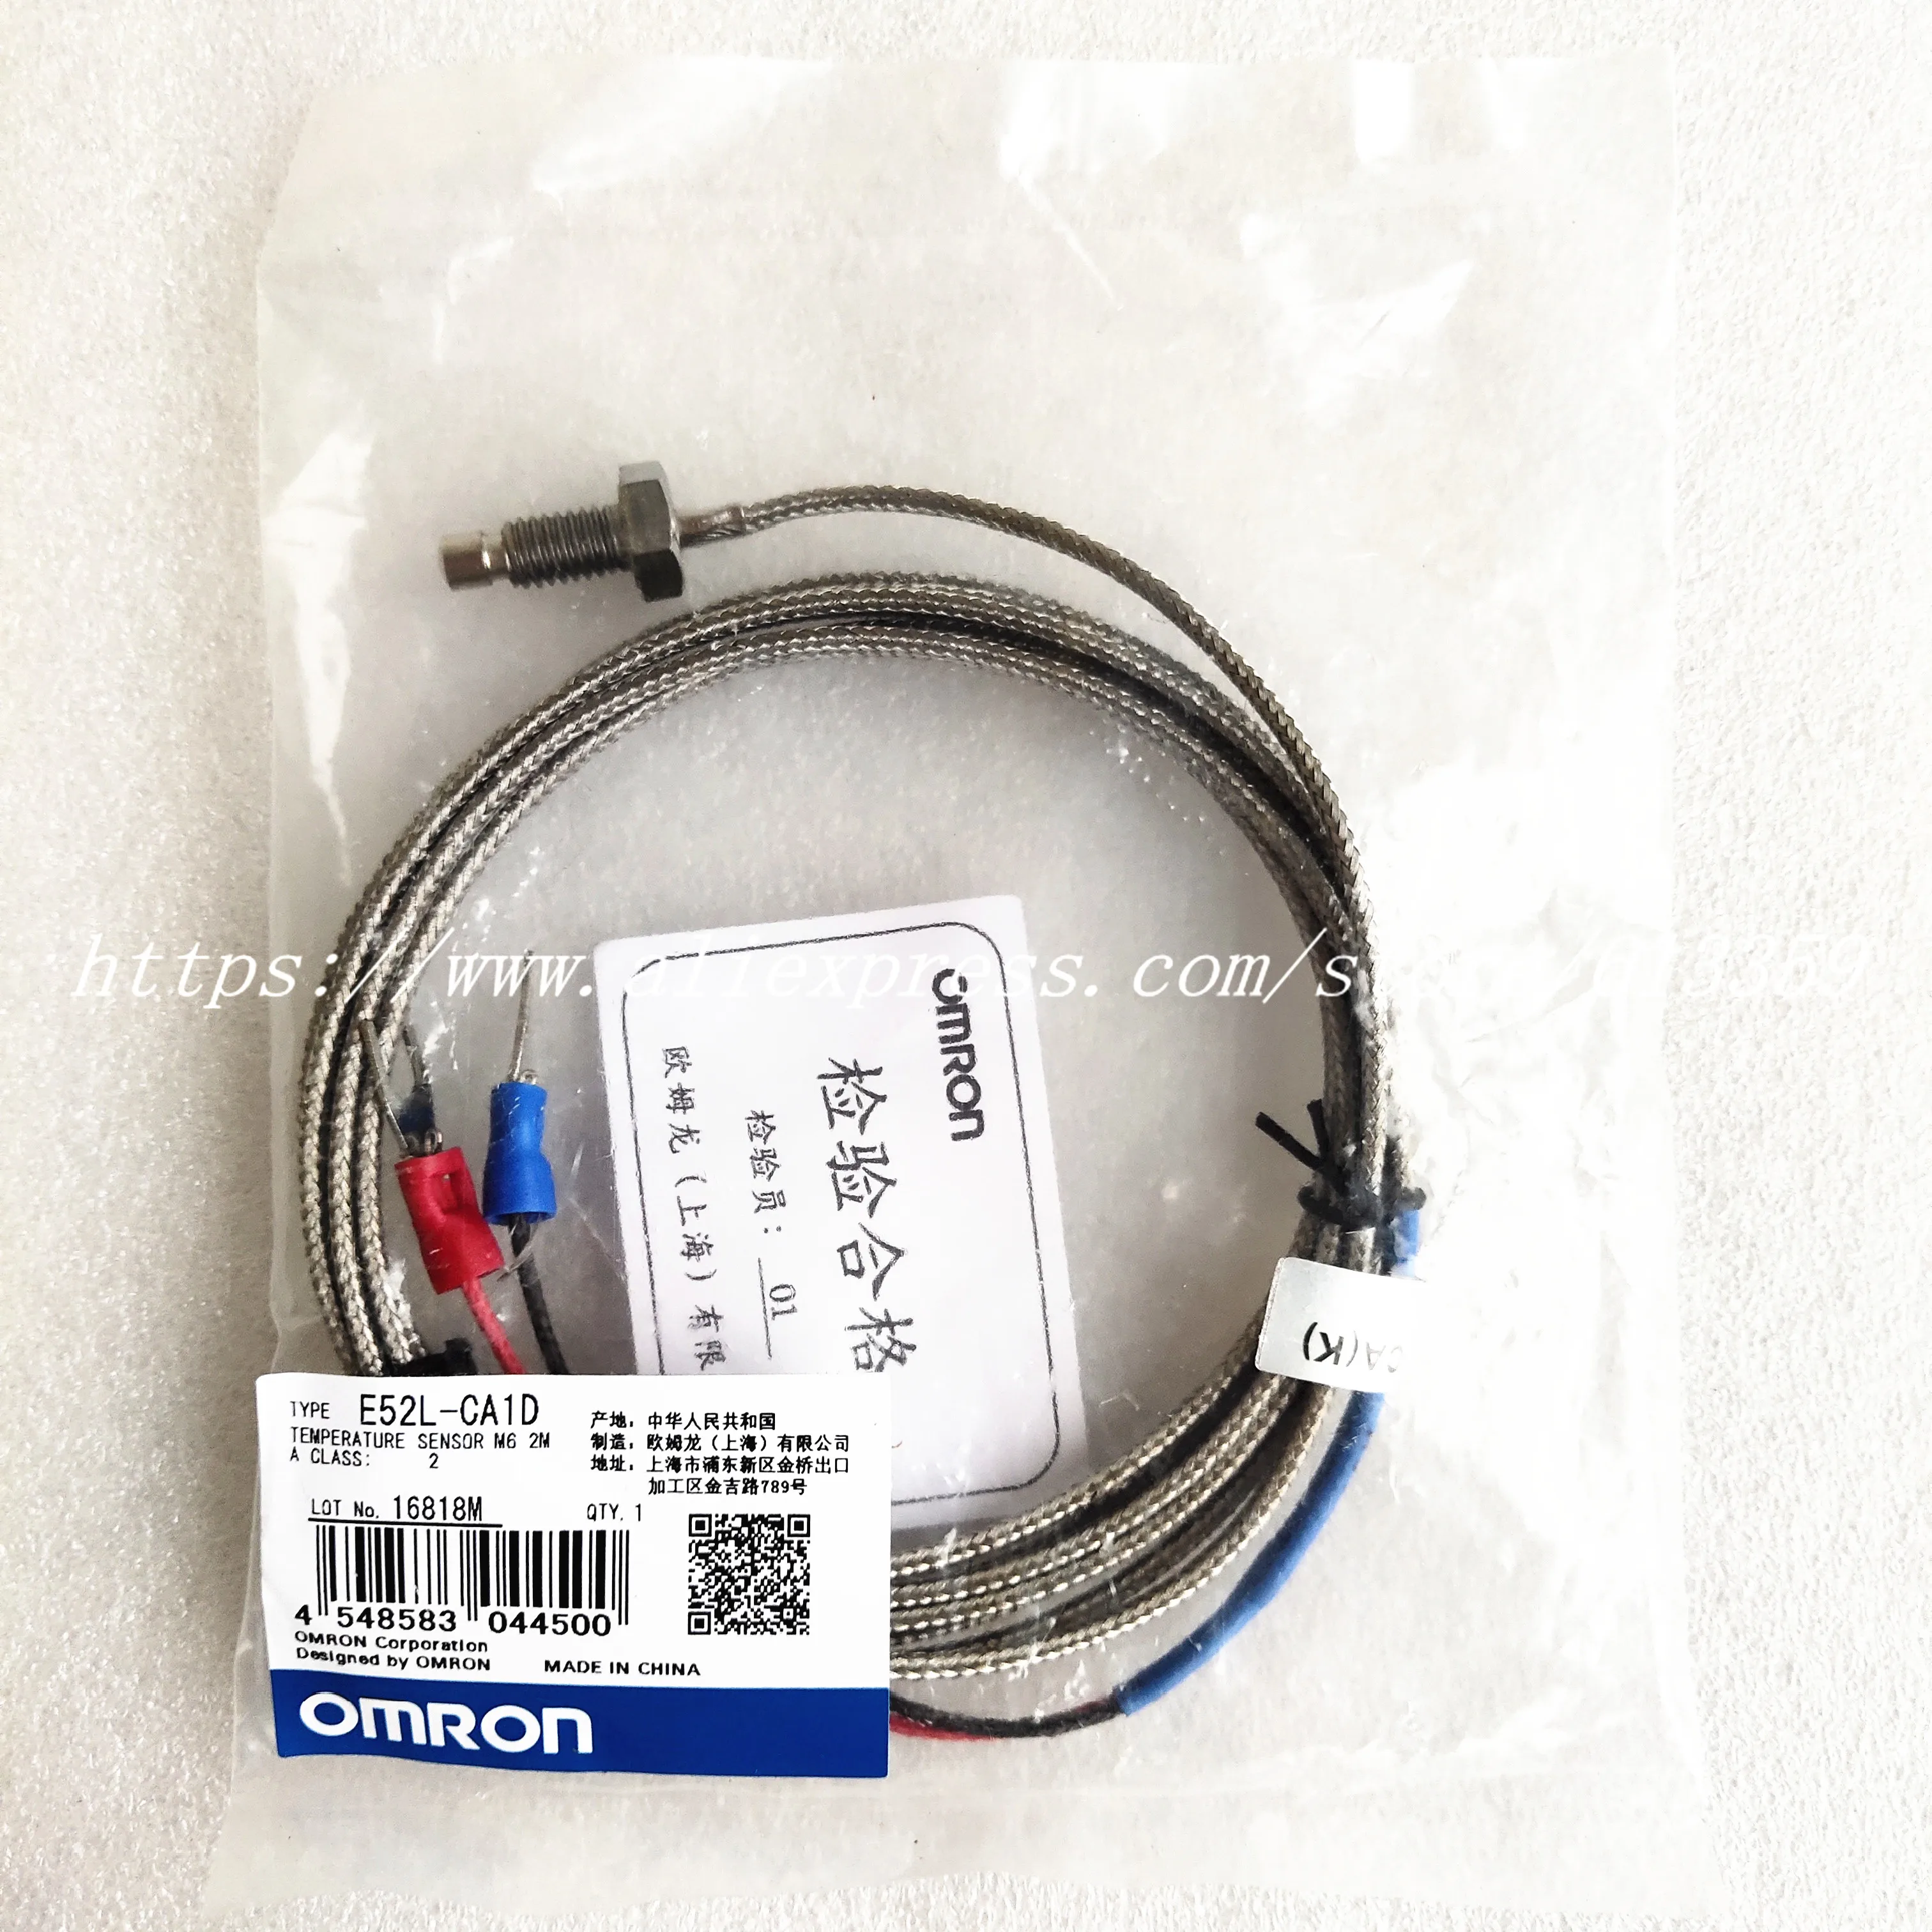 ONE NEW Omron Thermocouple E52-CA1DY